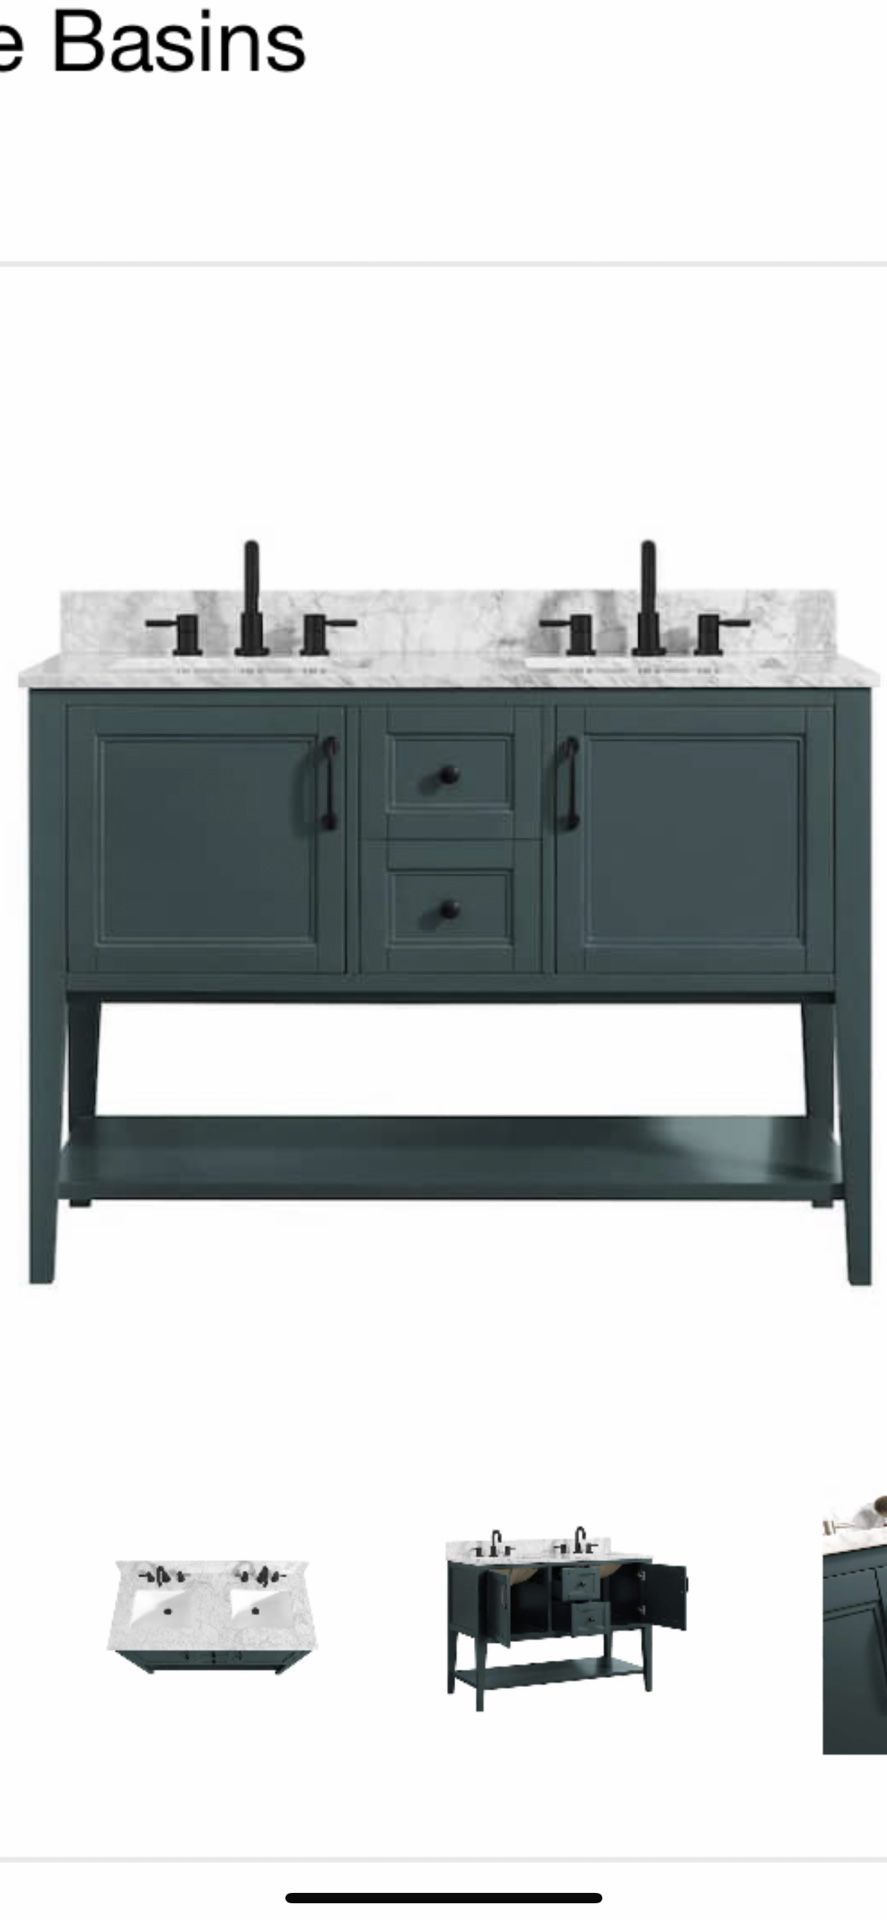 Home Decorators Collection Sherway 49 in. W x 22 in. D Bath Vanity in Antigua Green with Marble Vanity Top in Carrara White with White Basins